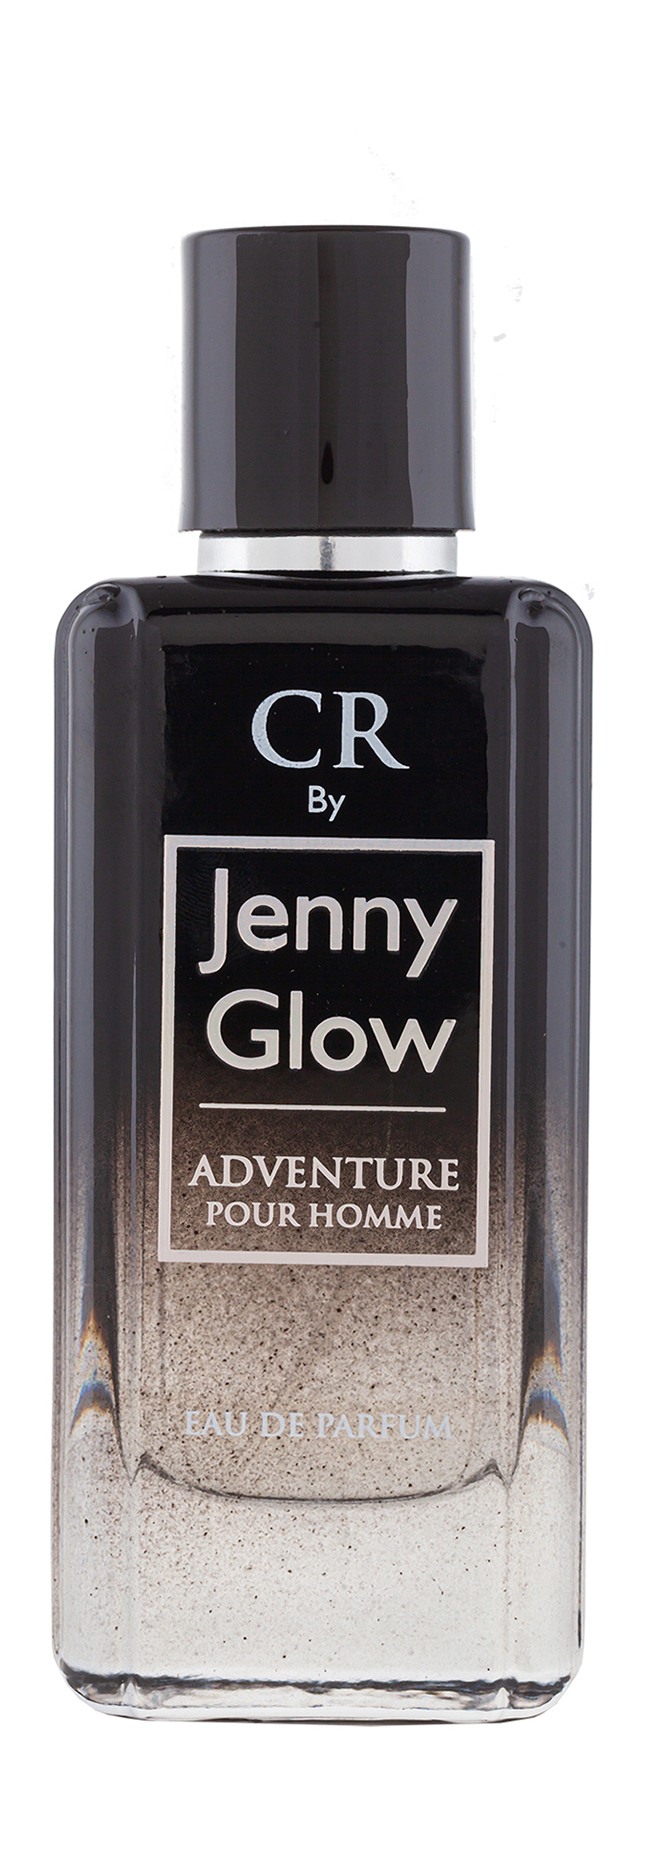 Парфюмерная вода Jenny Glow CR Adventure Pour Homme 50 мл